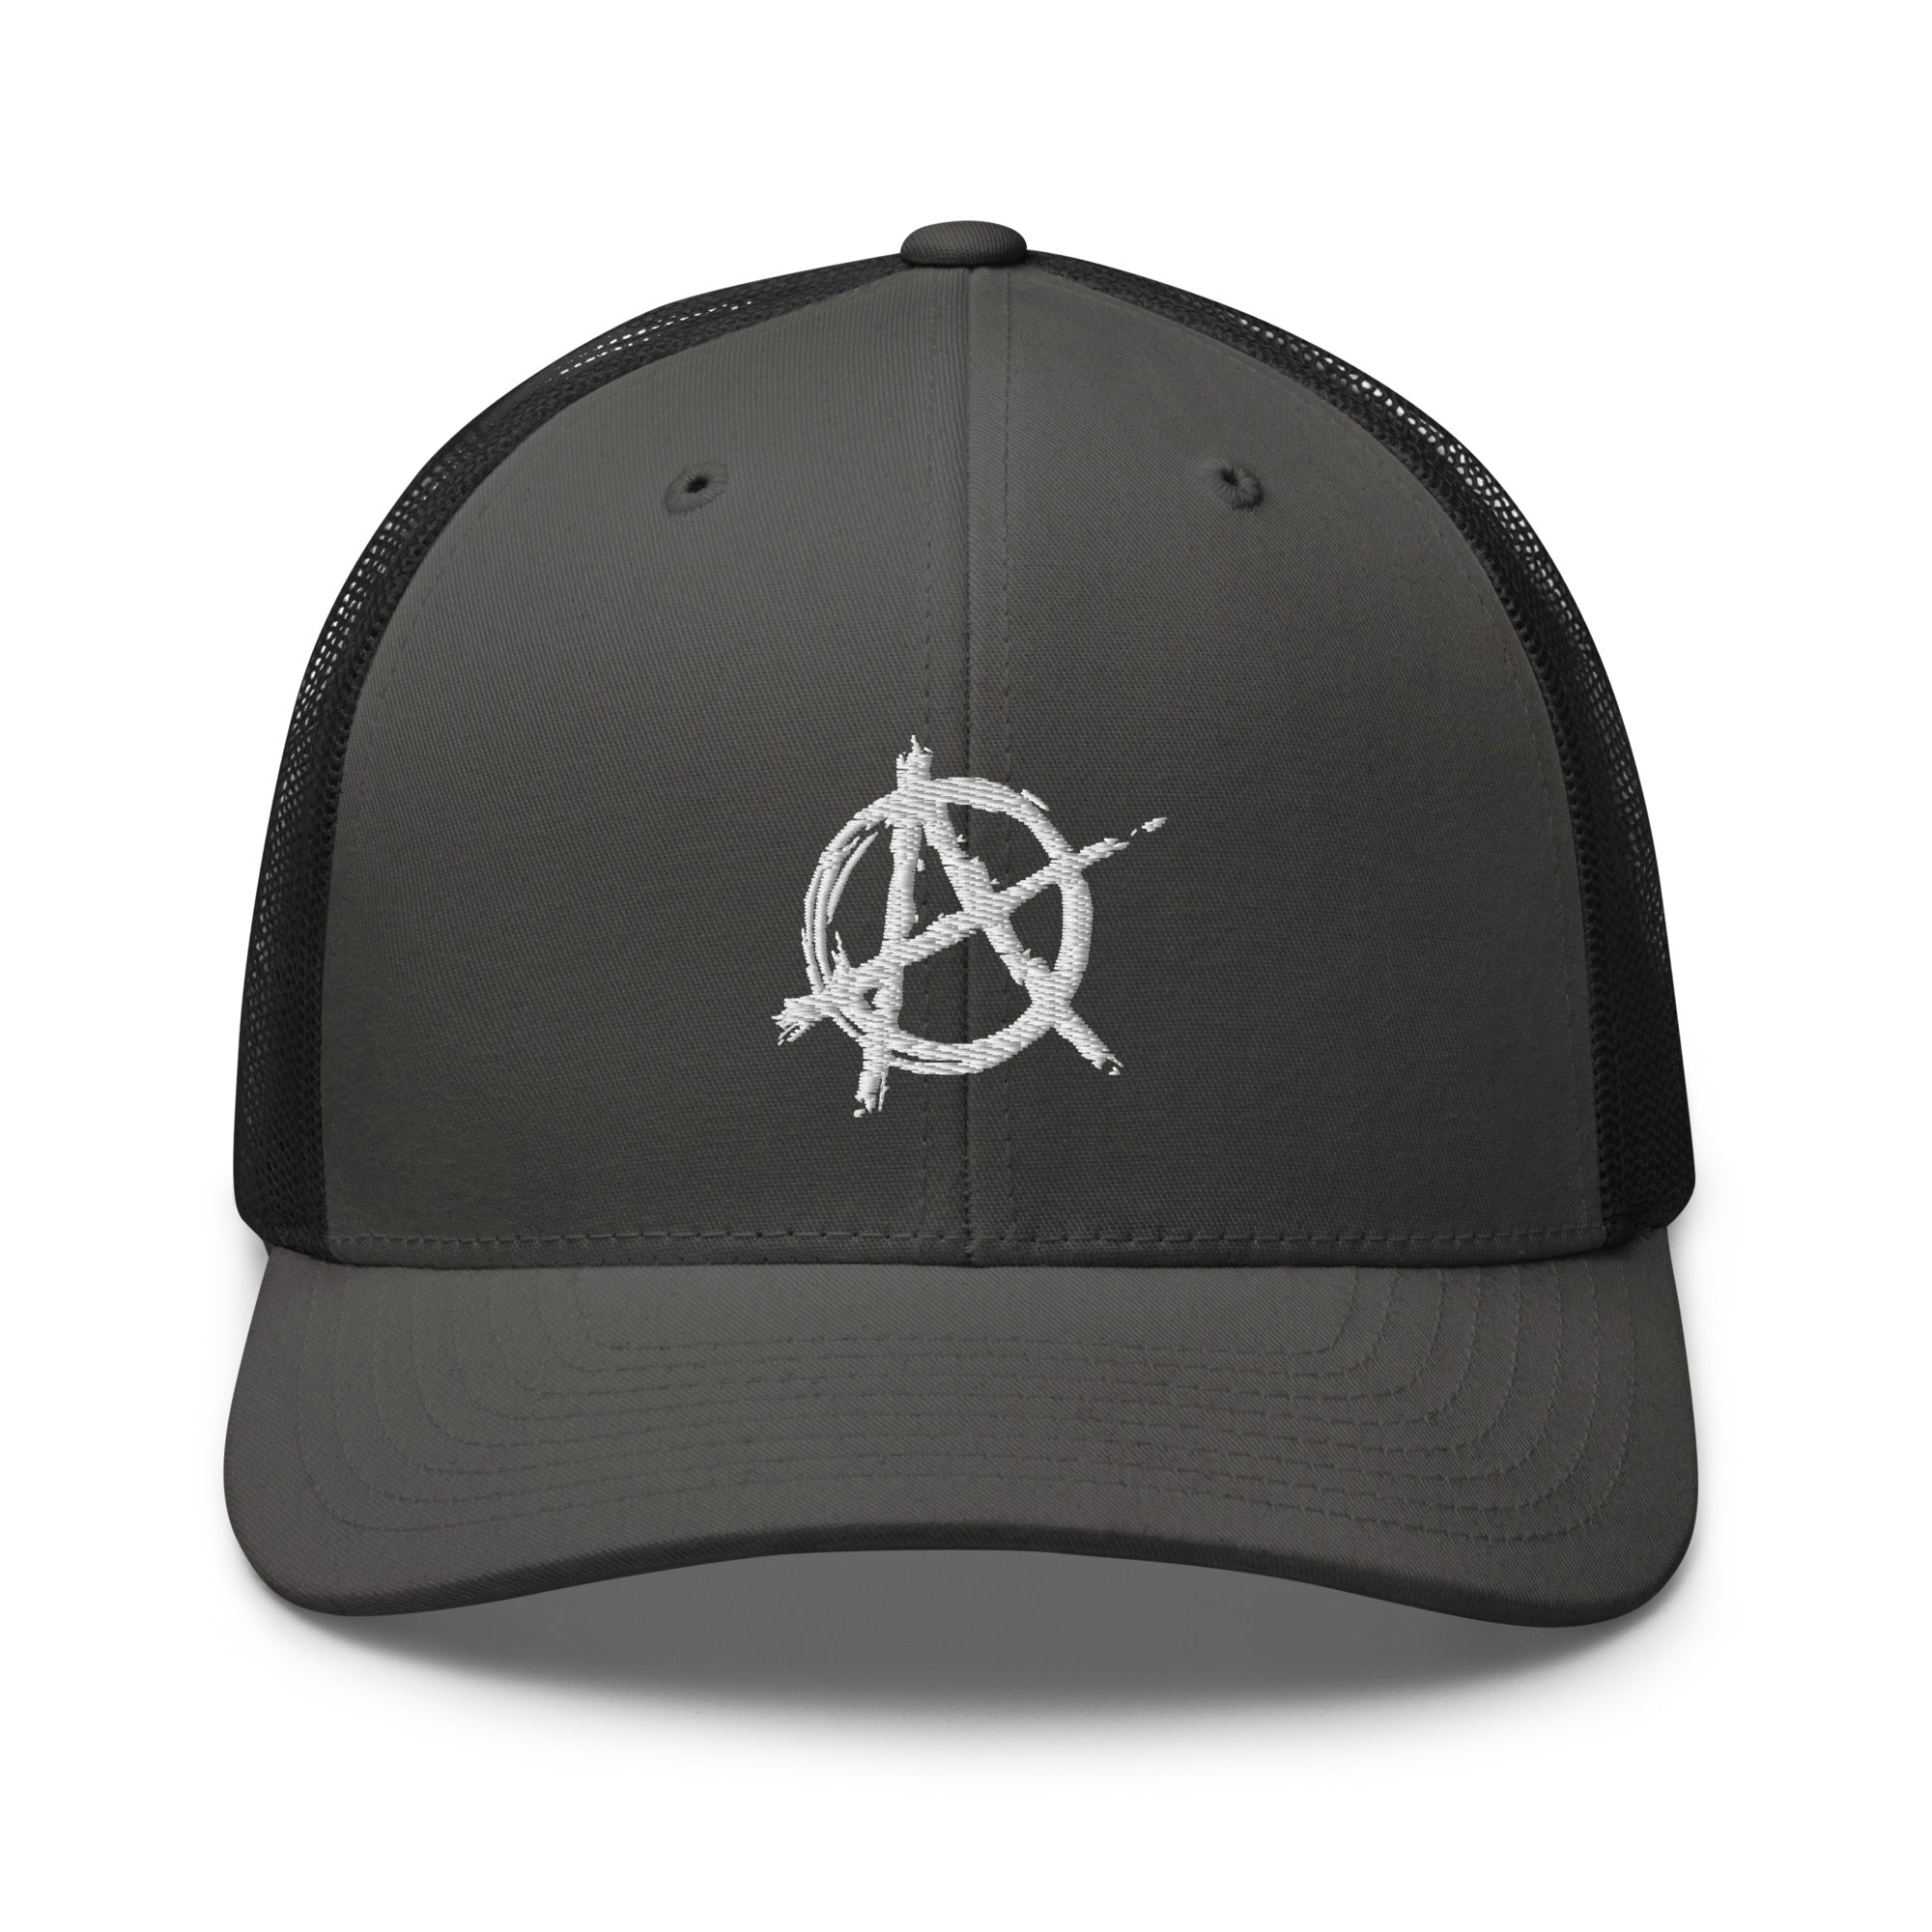 White Anarchy Sign Punk Rock Chaos Embroidered Retro Trucker Cap Snapback Hat